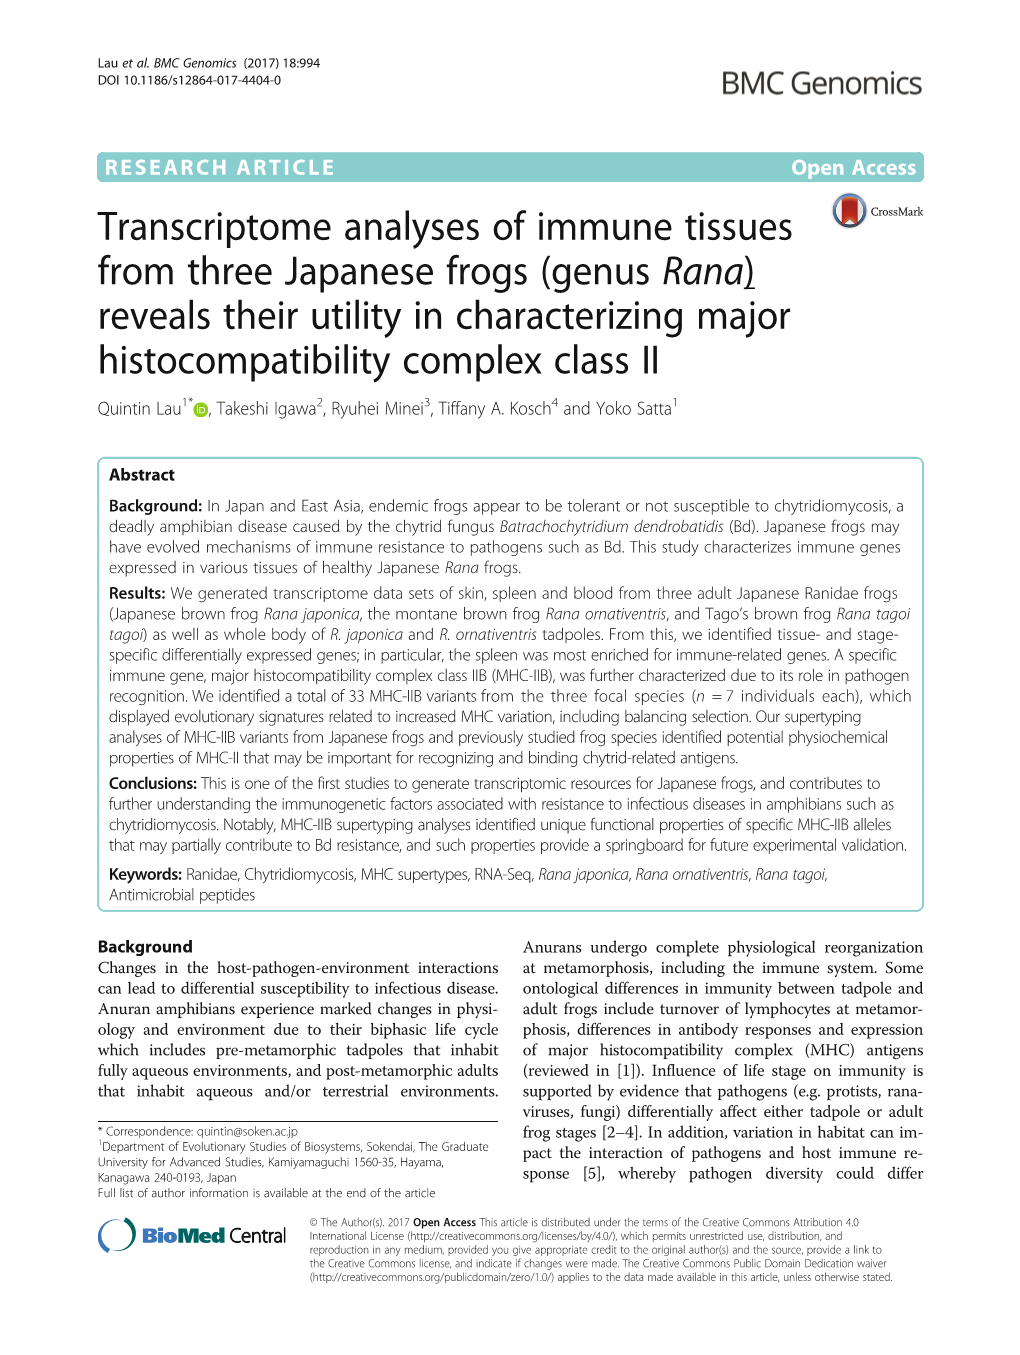 Transcriptome Analyses of Immune Tissues from Three